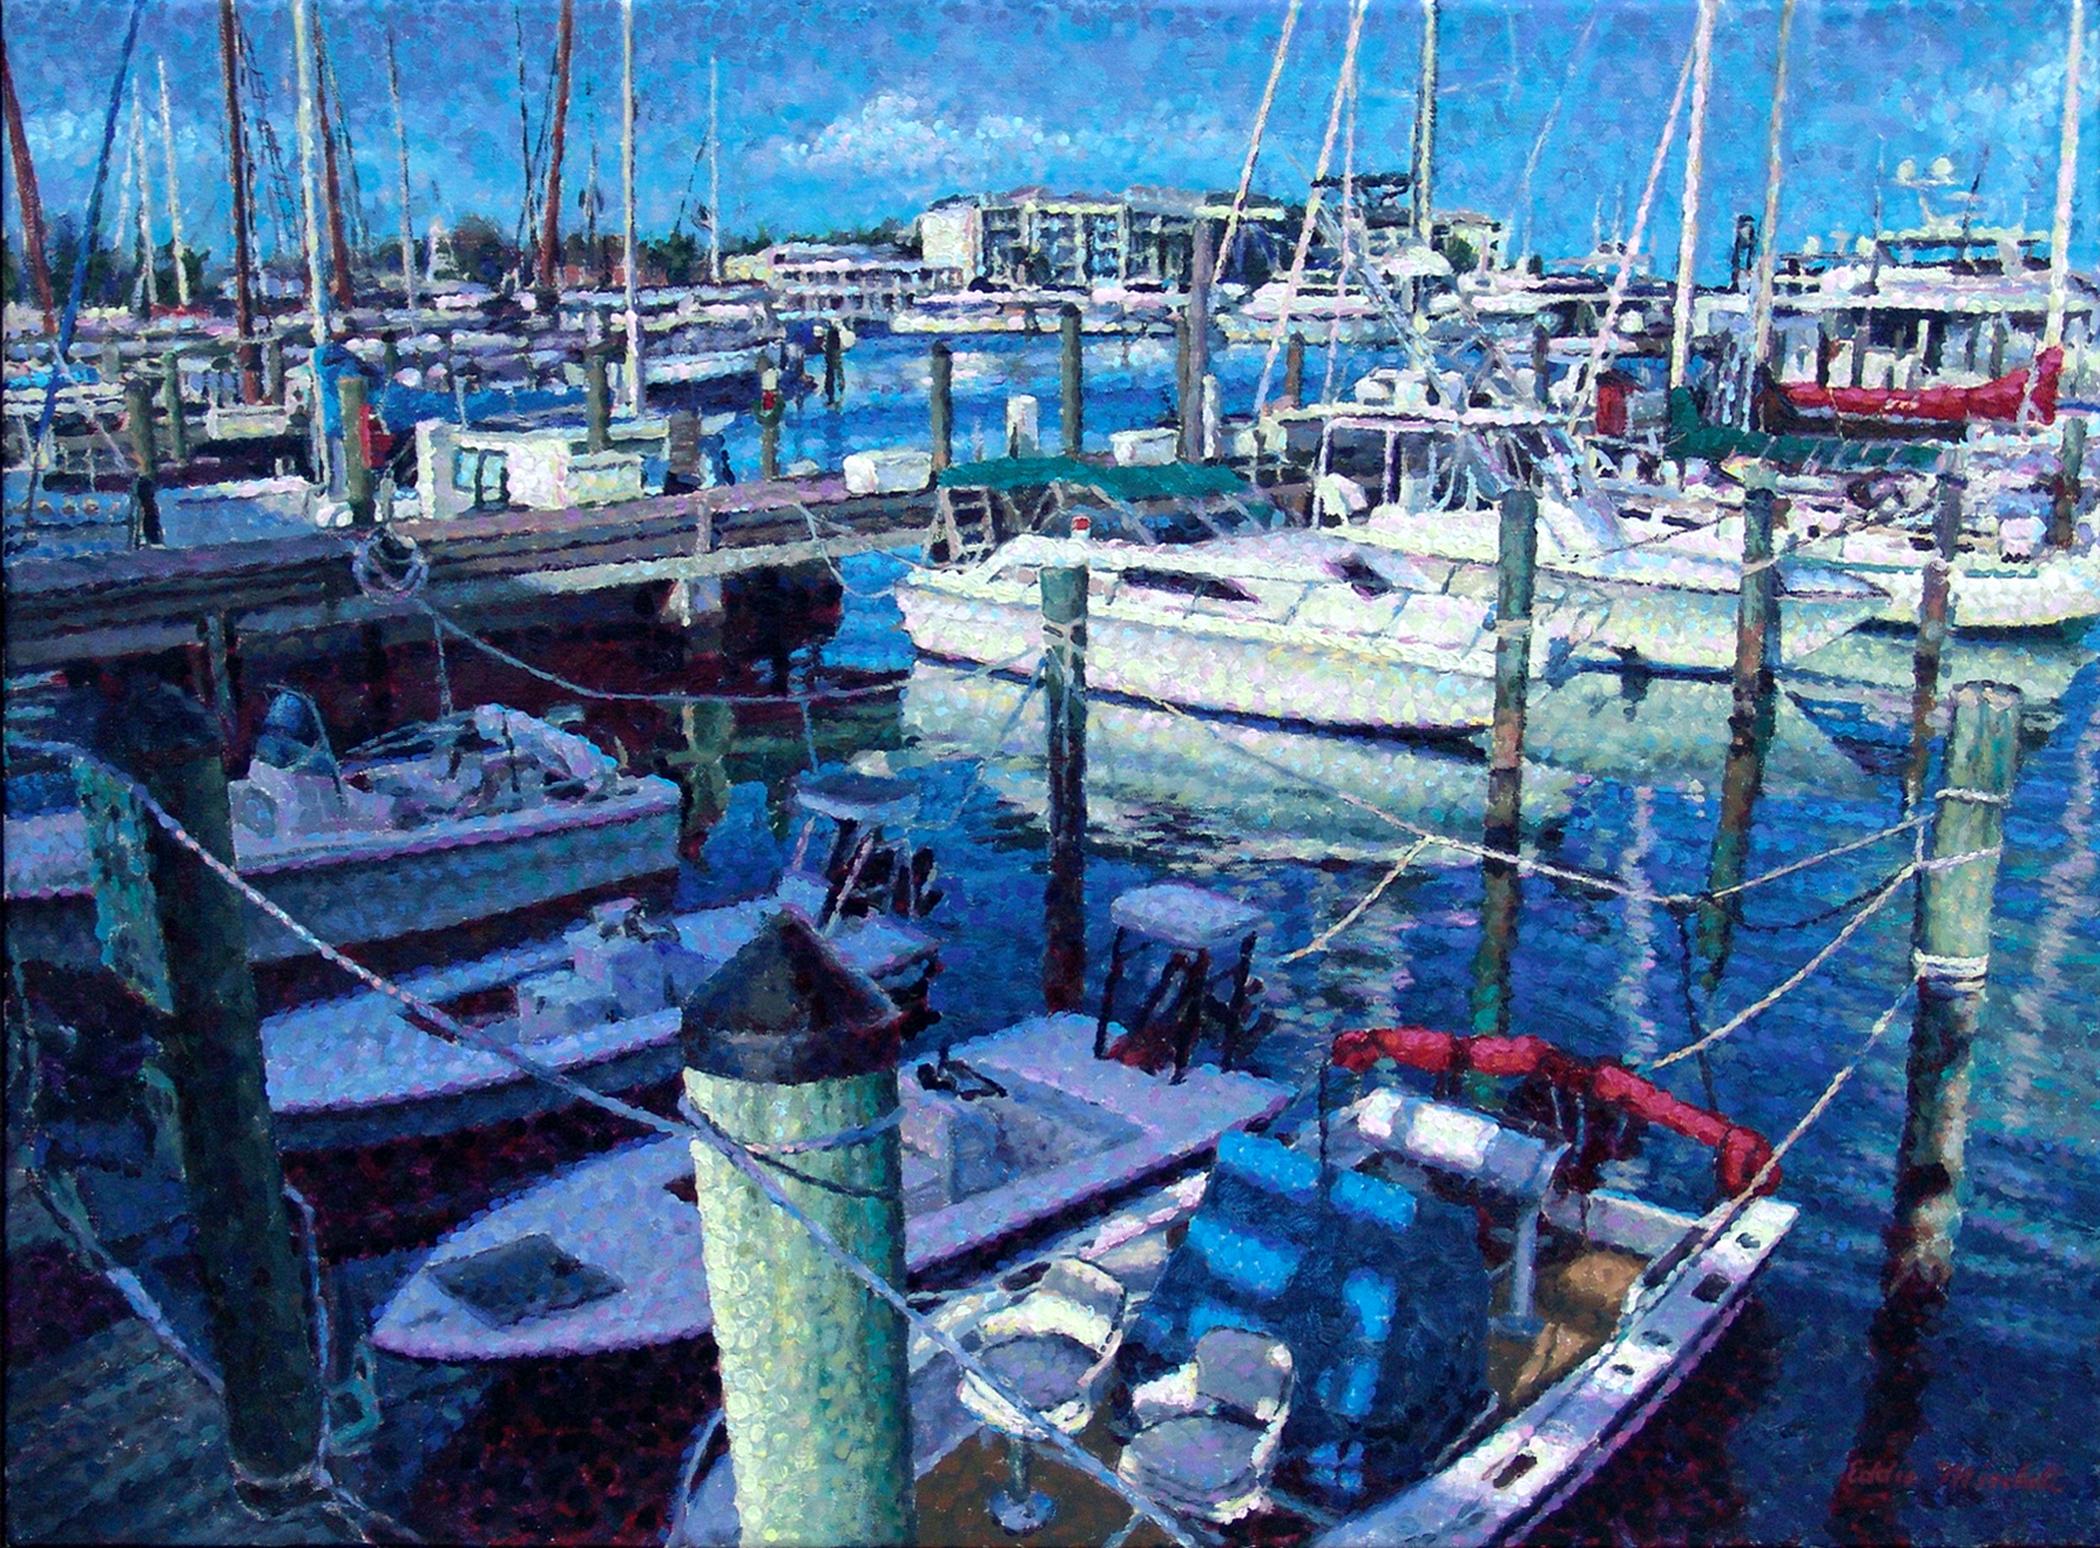 "A Bedazzling Blue Bliss"   Key West Marina Boats 18" x 24" oil on canvas  - Art by Eddie Mitchell